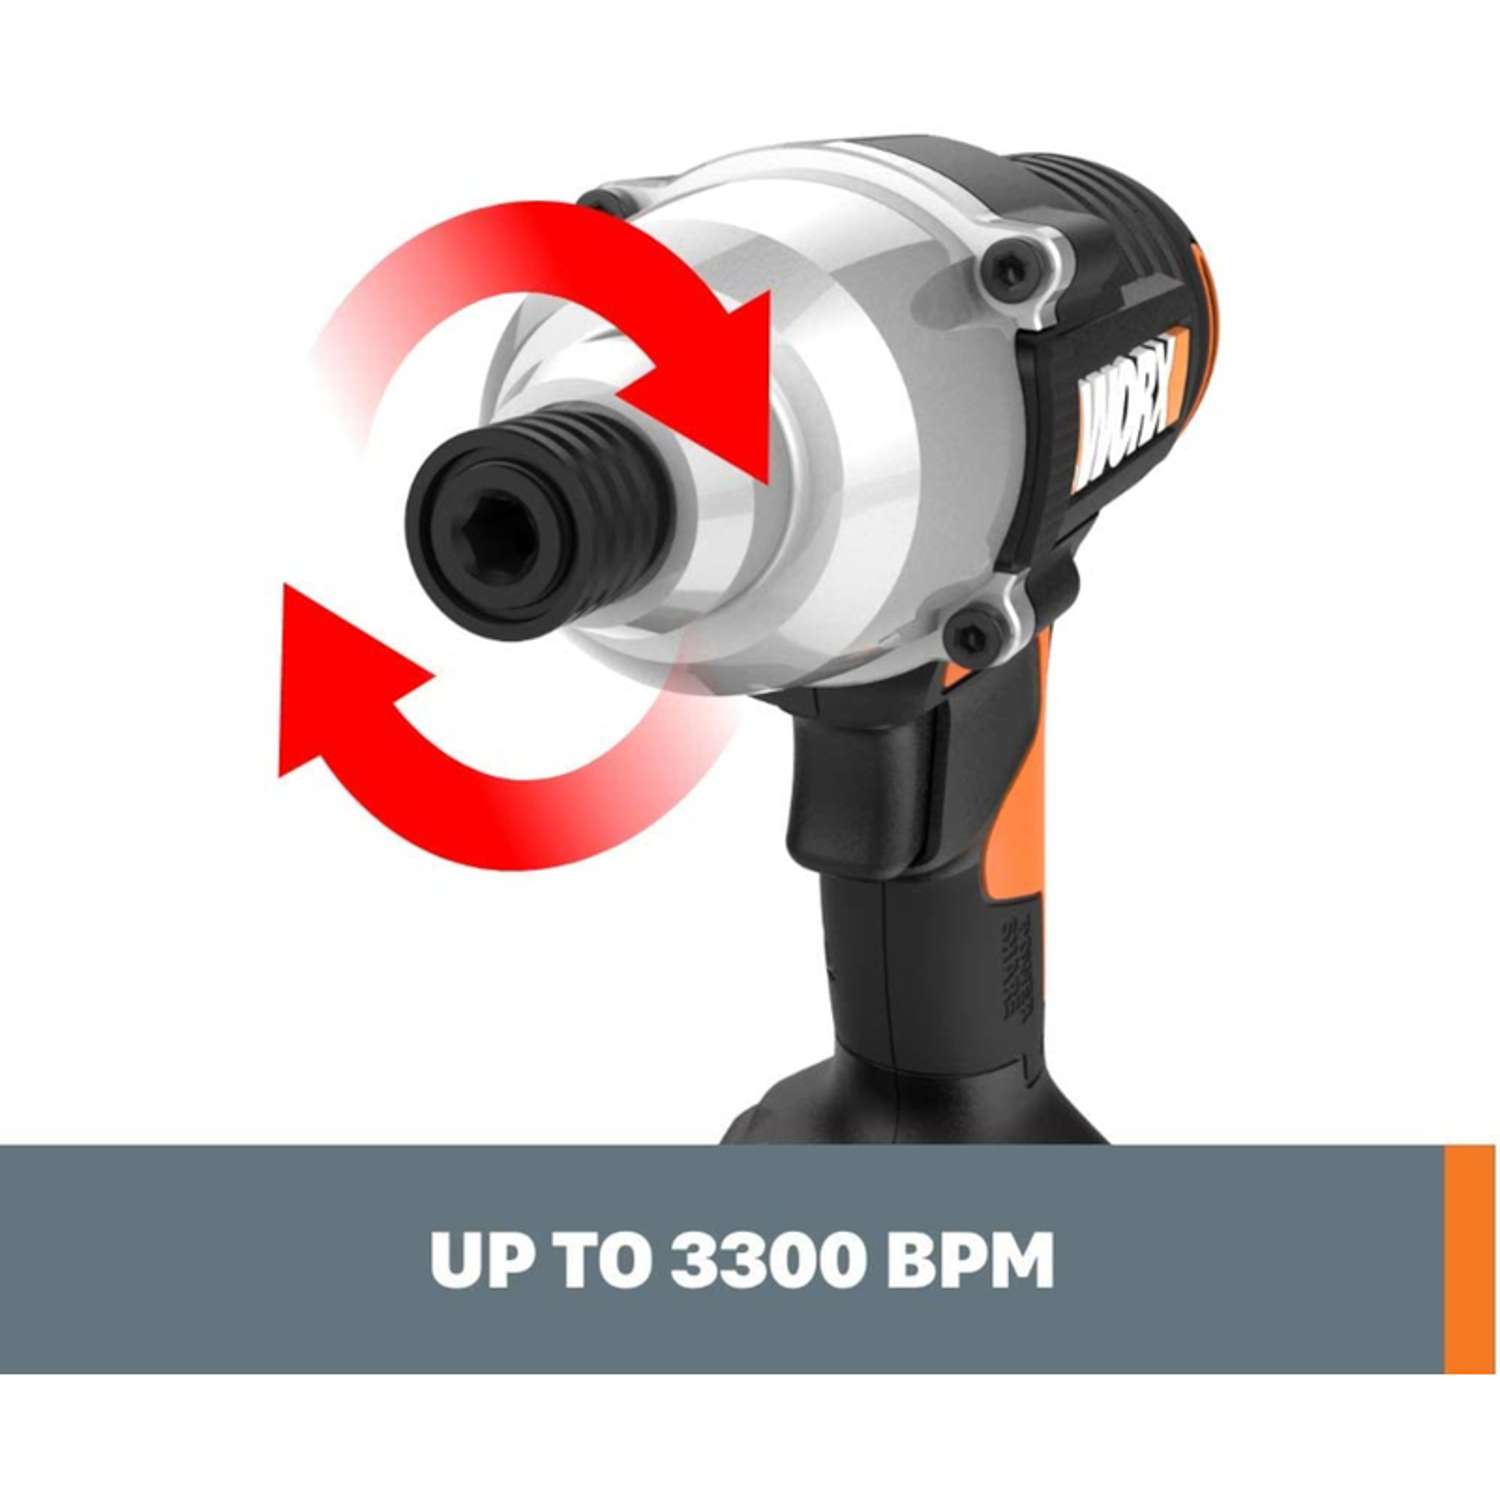 New WORX 20V Power Share Stick Vacuum Eliminates Down Time with Dual  Charging Wall Mount